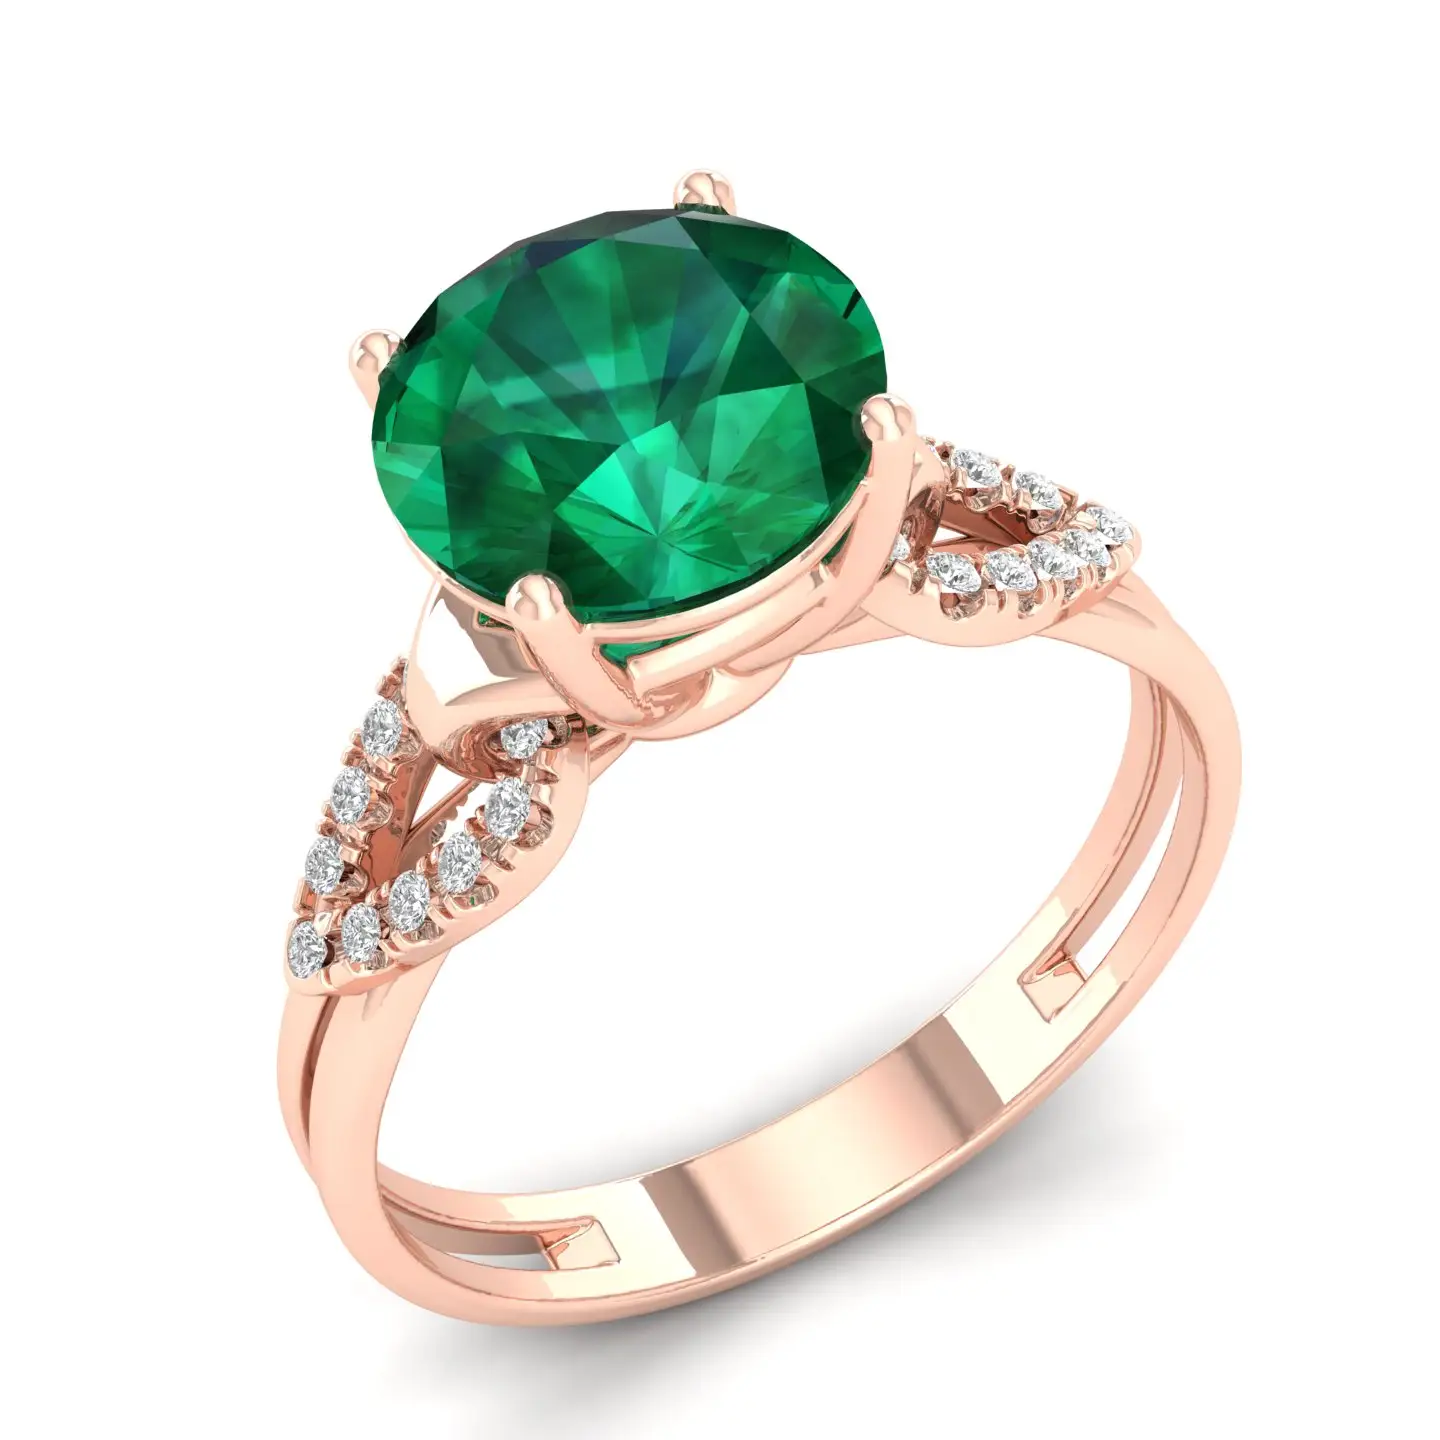 Luxury Elegant Natural Emerald stone White Diamond Ring 14kt Solid Gold for Women Yellow White Rose Gold Fine Jewelry Ring